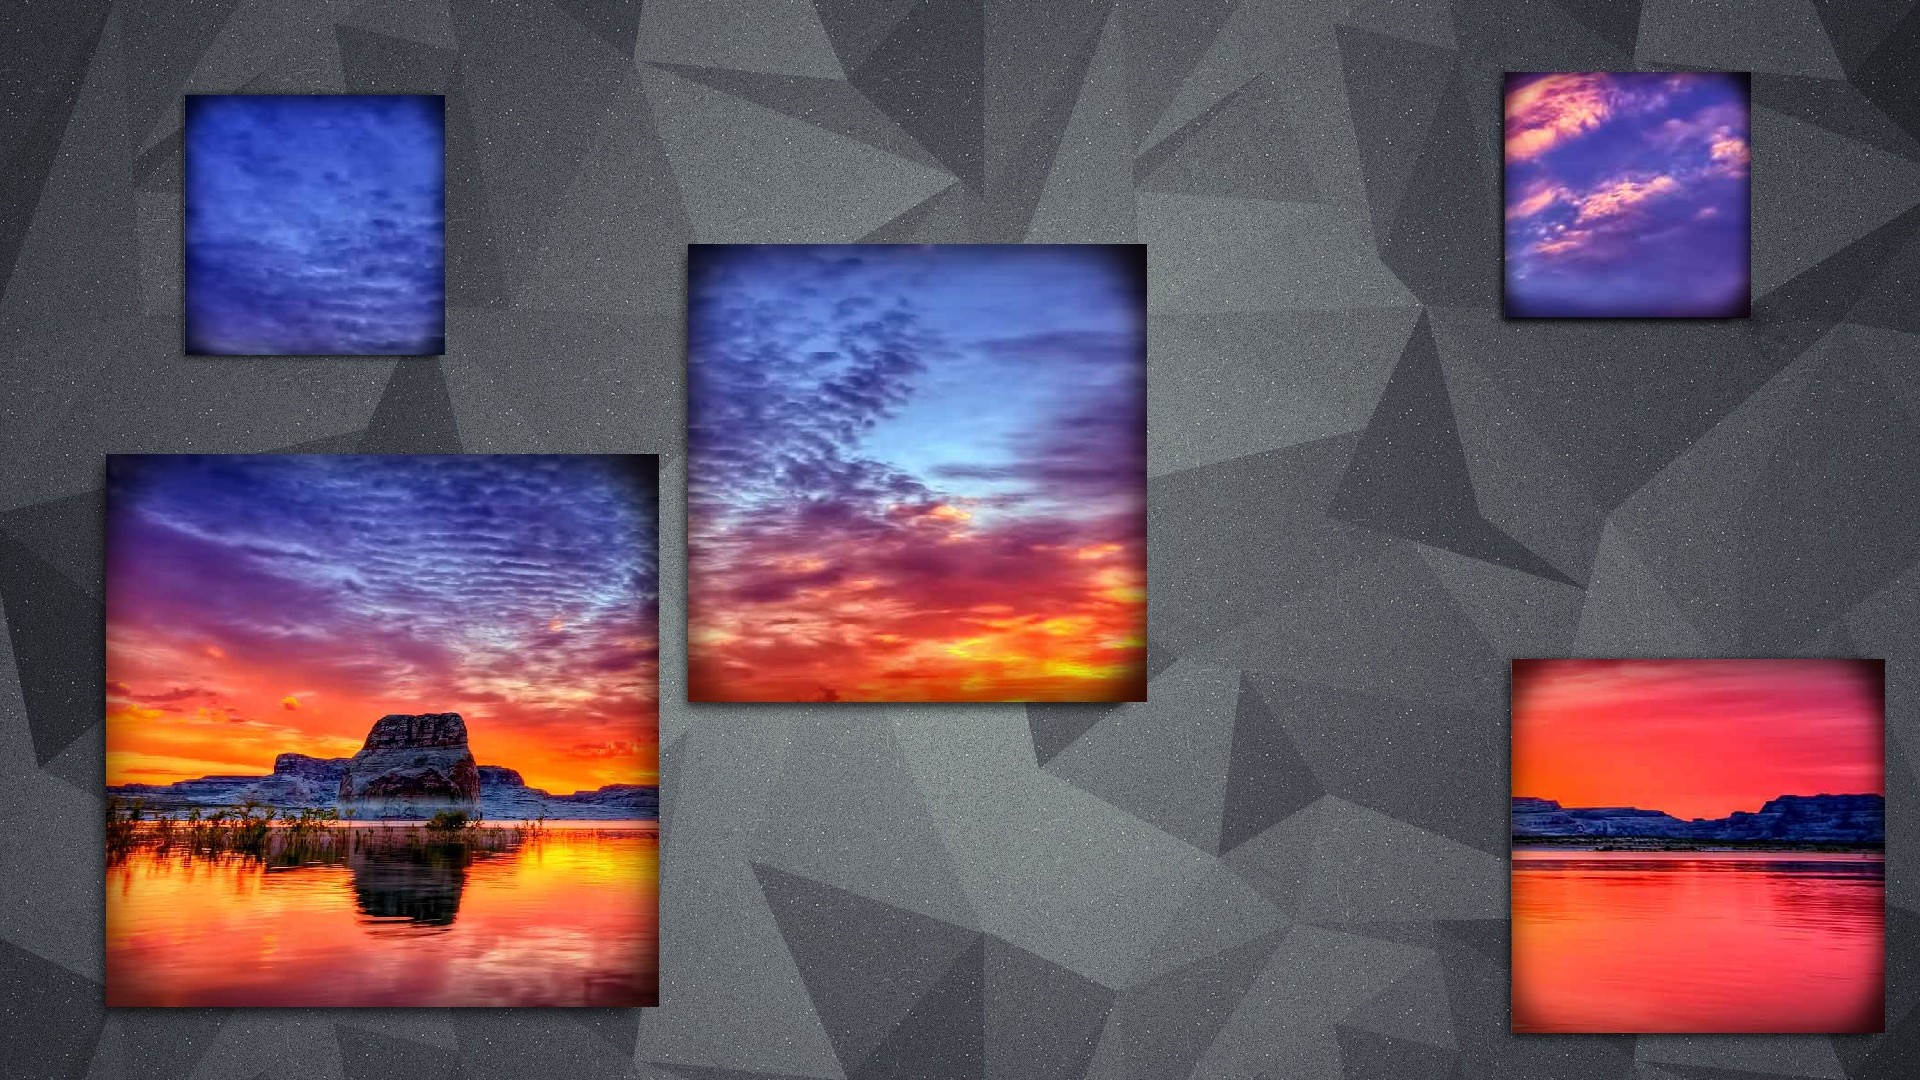 General 1920x1080 sunset square collage sky abstract